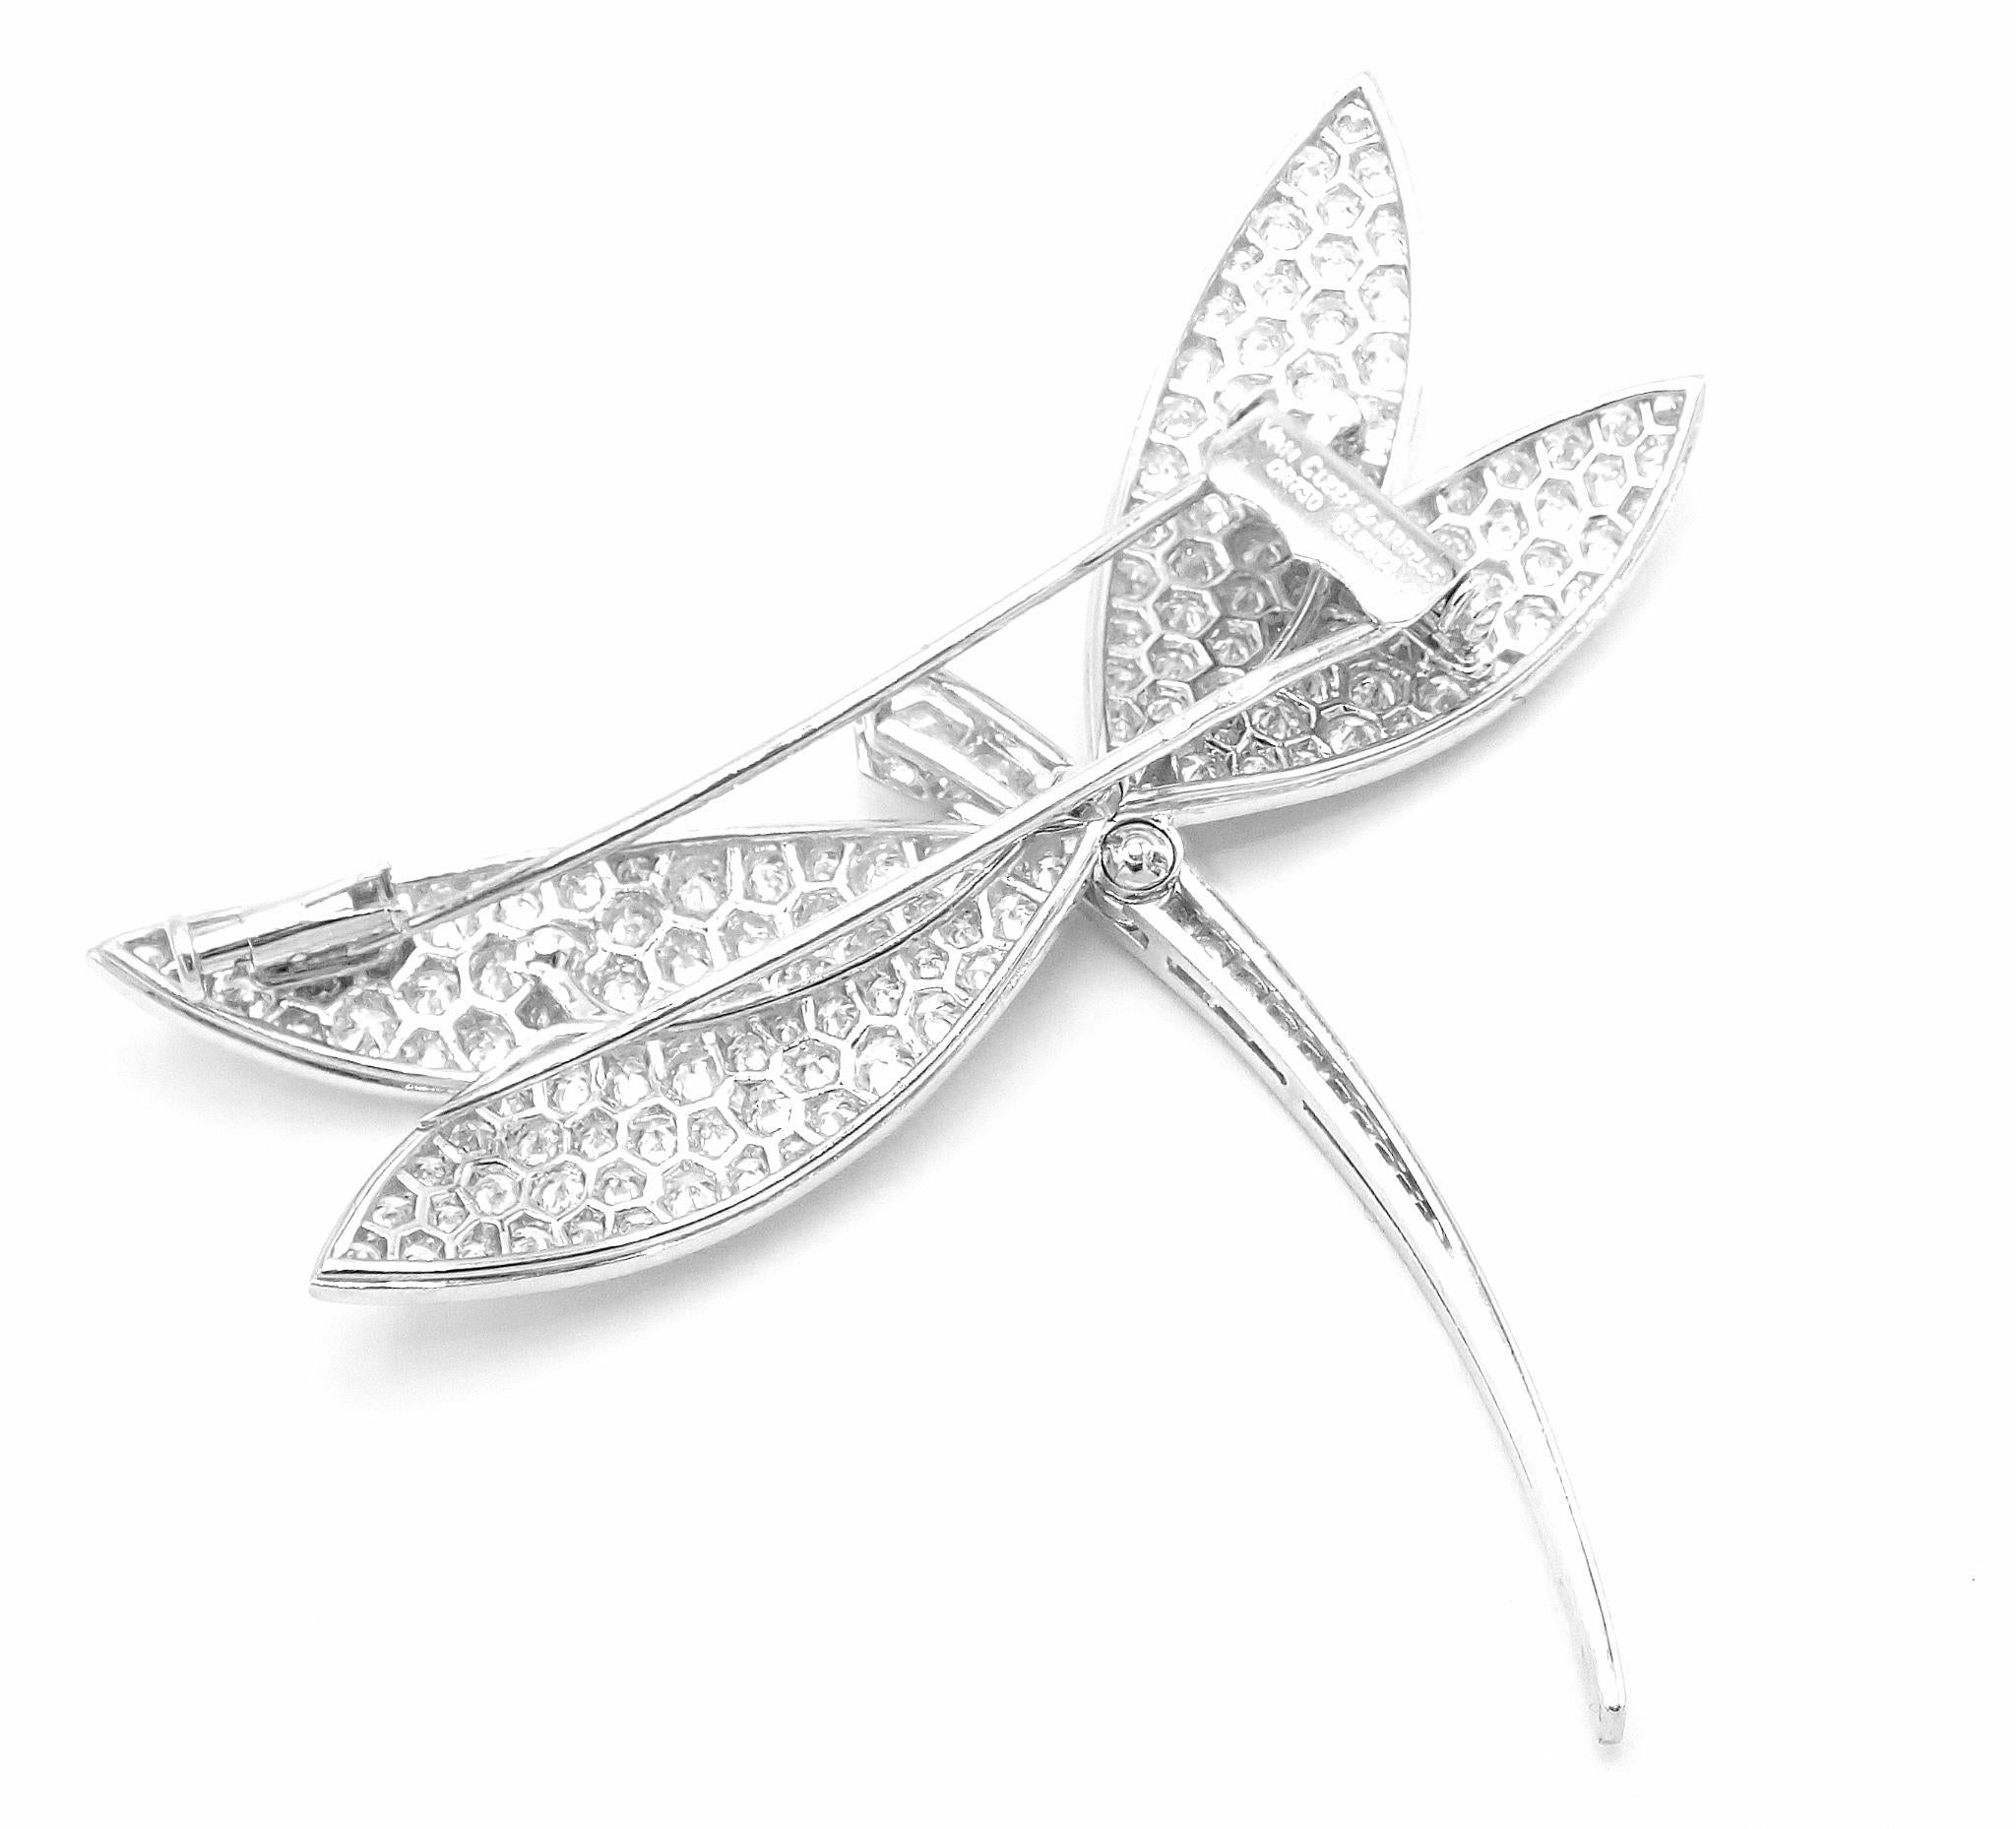 Van Cleef & Arpels Dragonfly Diamond Extra Large White Gold Pin Brooch 6